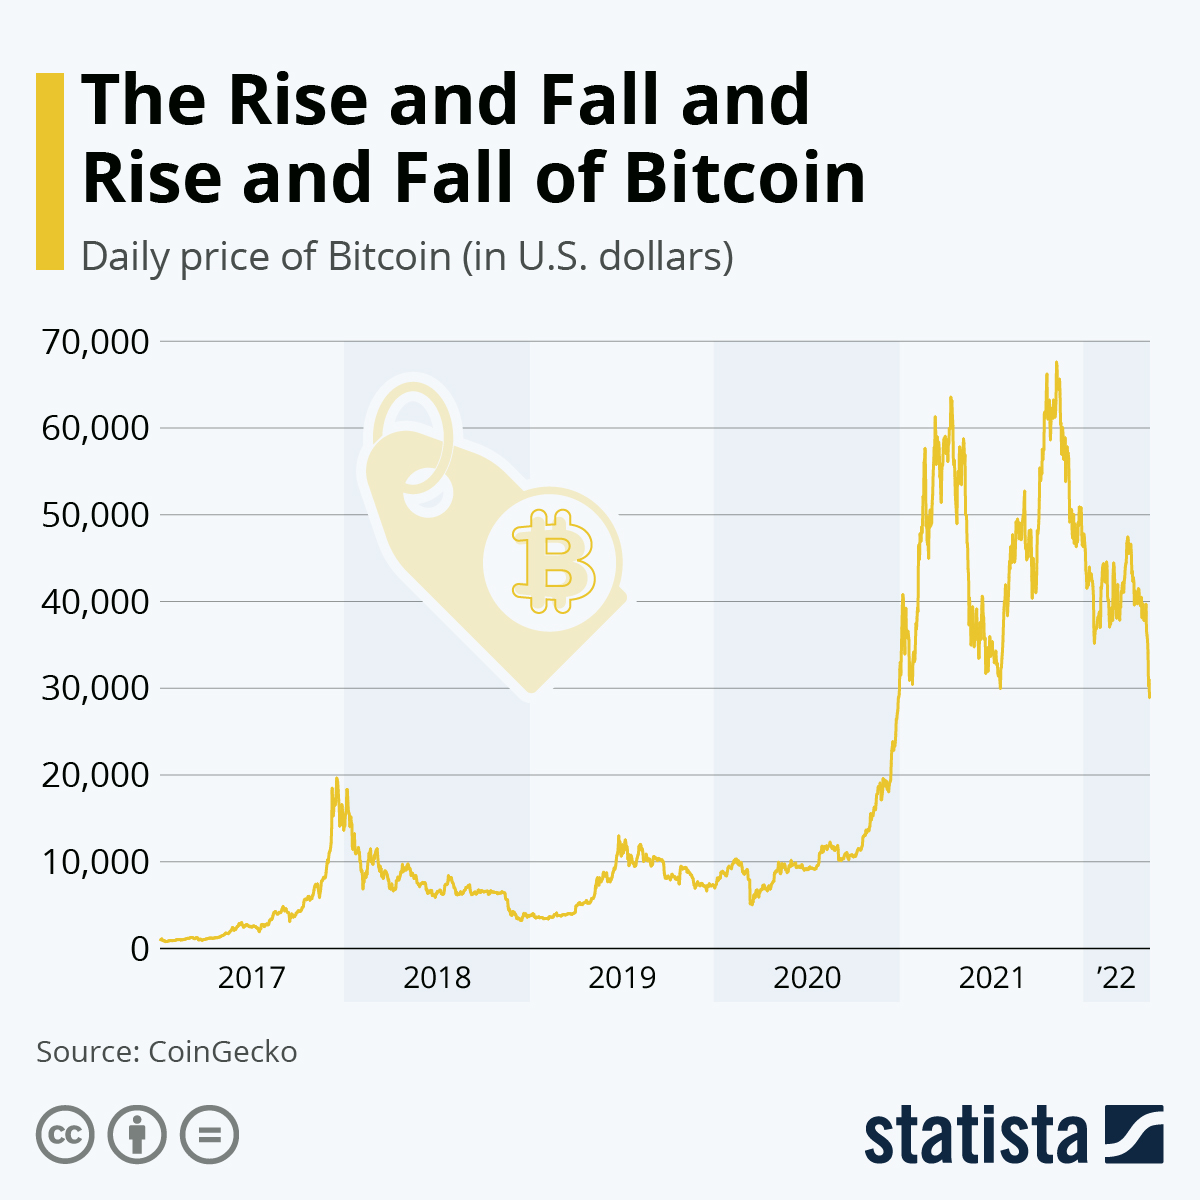 Bitcoin Price History | BTC INR Historical Data, Chart & News (7th March ) - Gadgets 